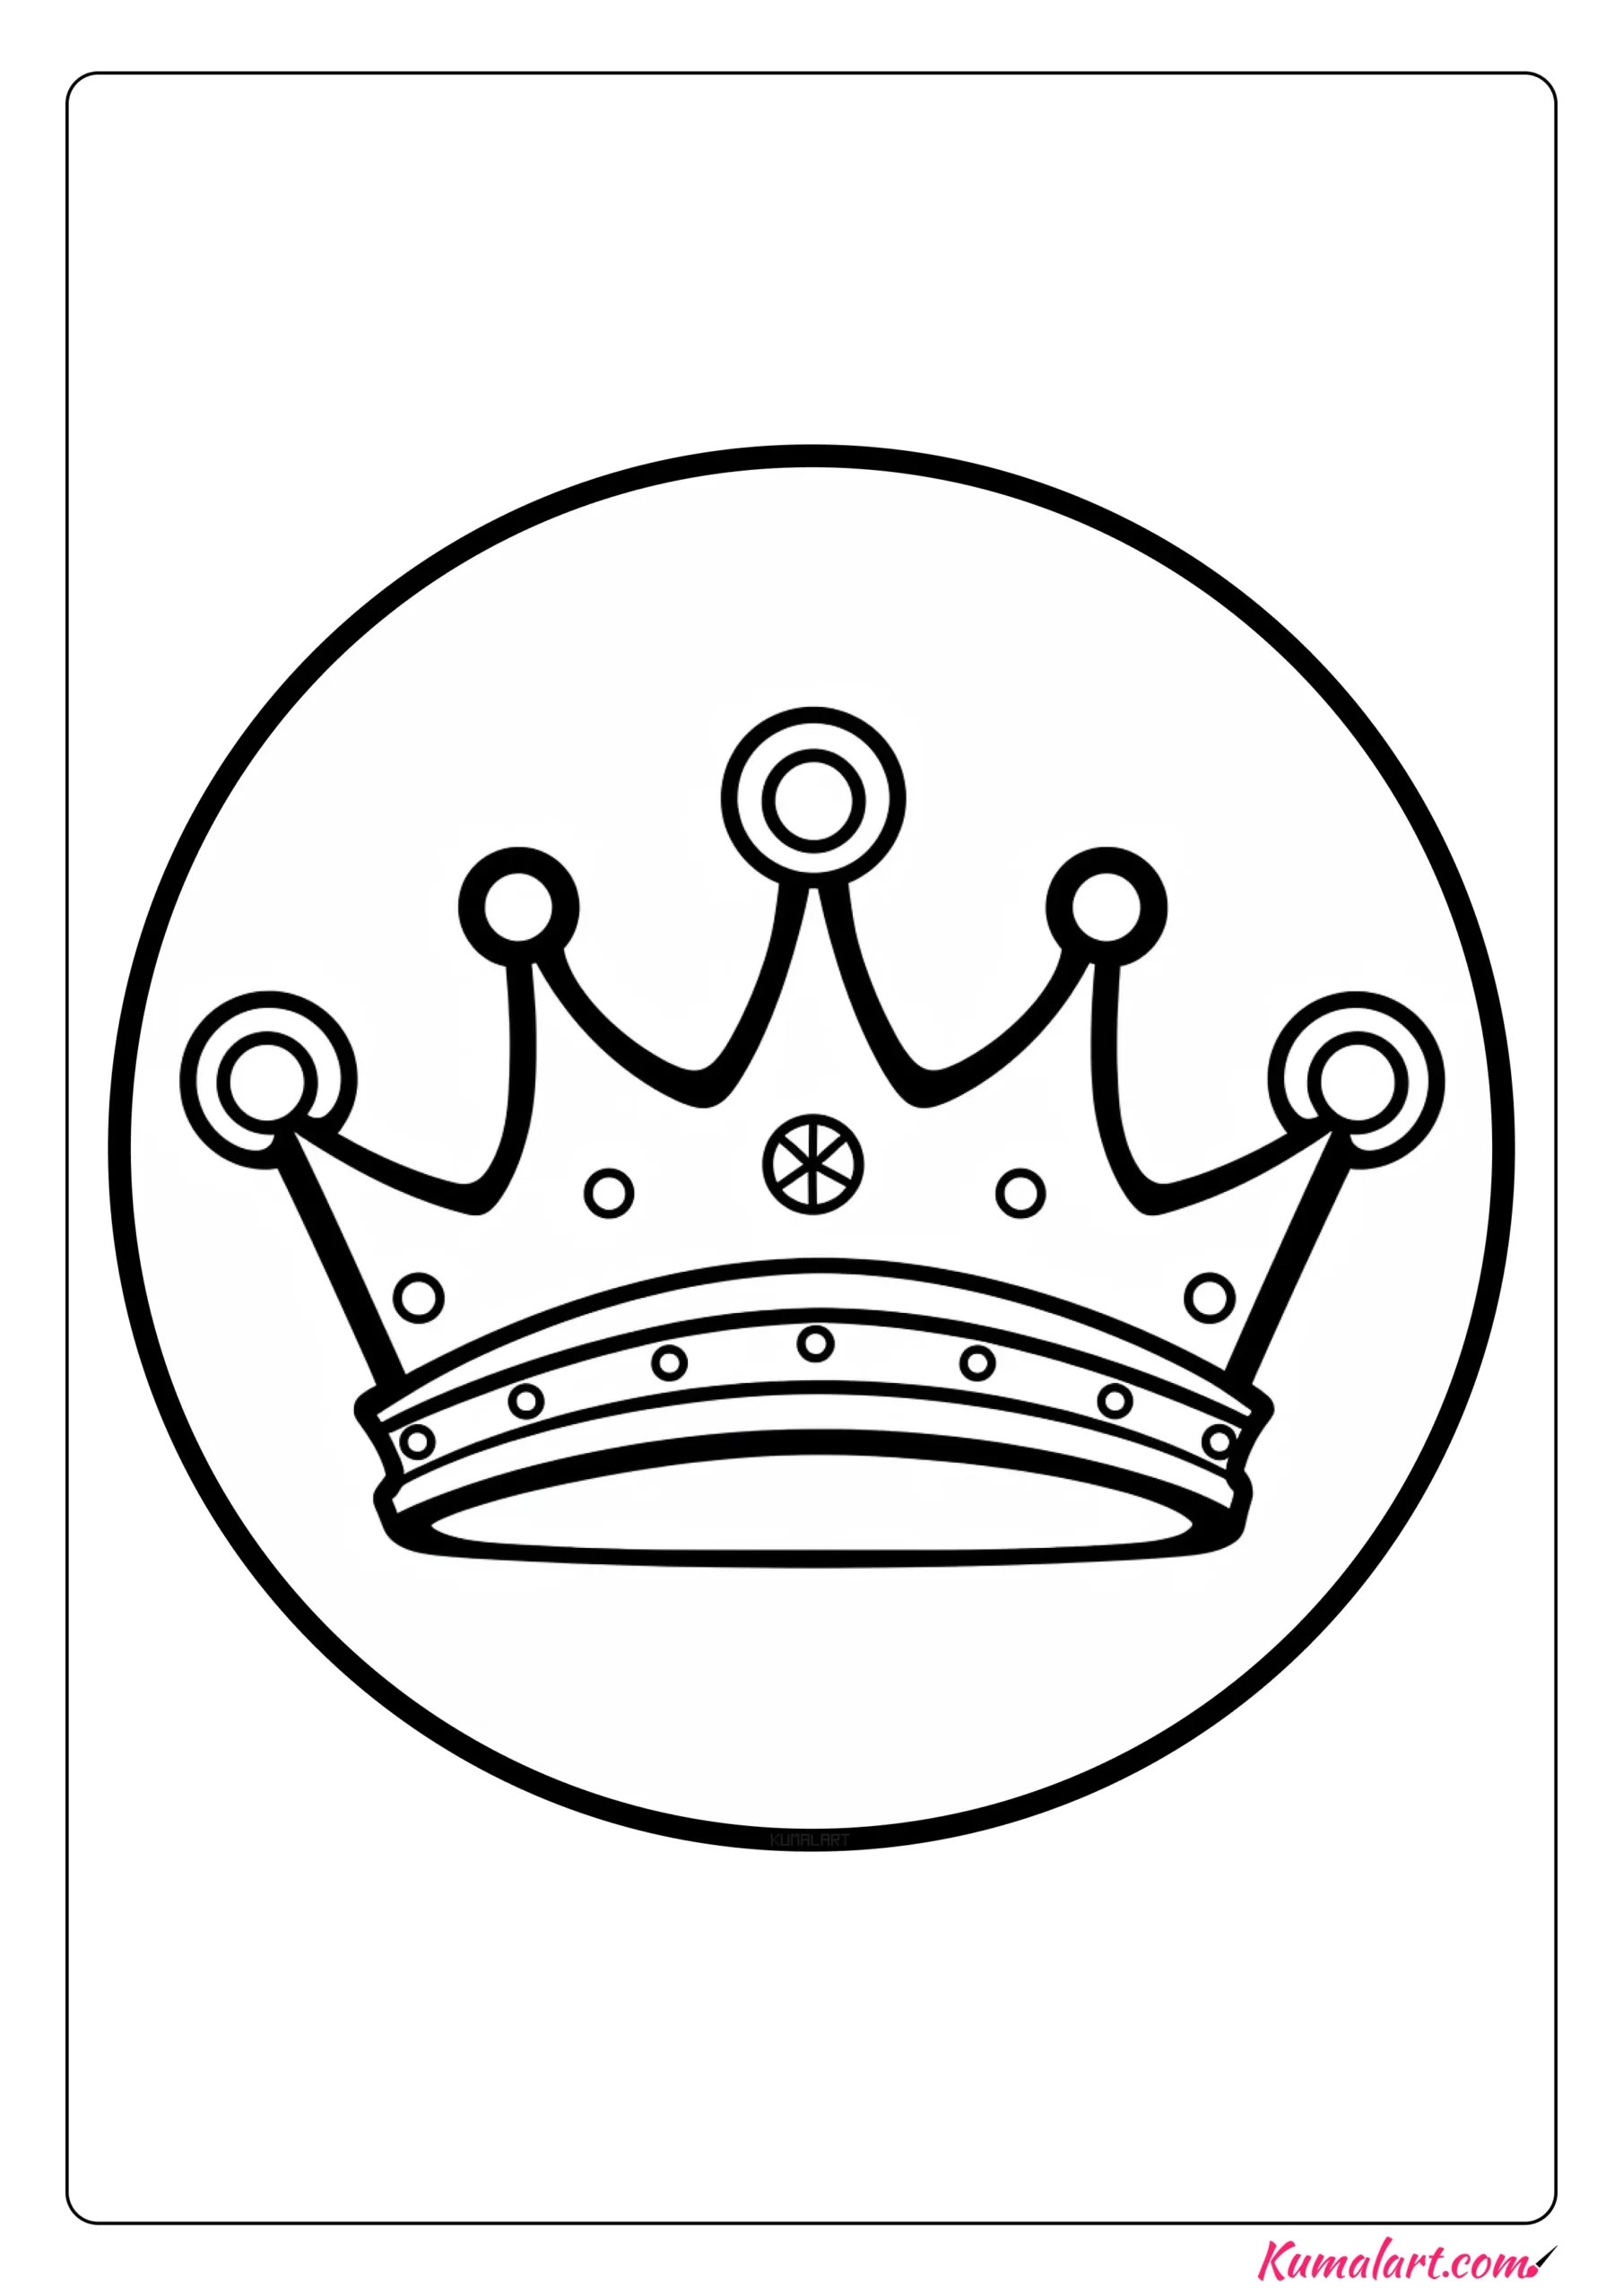 Holy Princess Crown Coloring Page